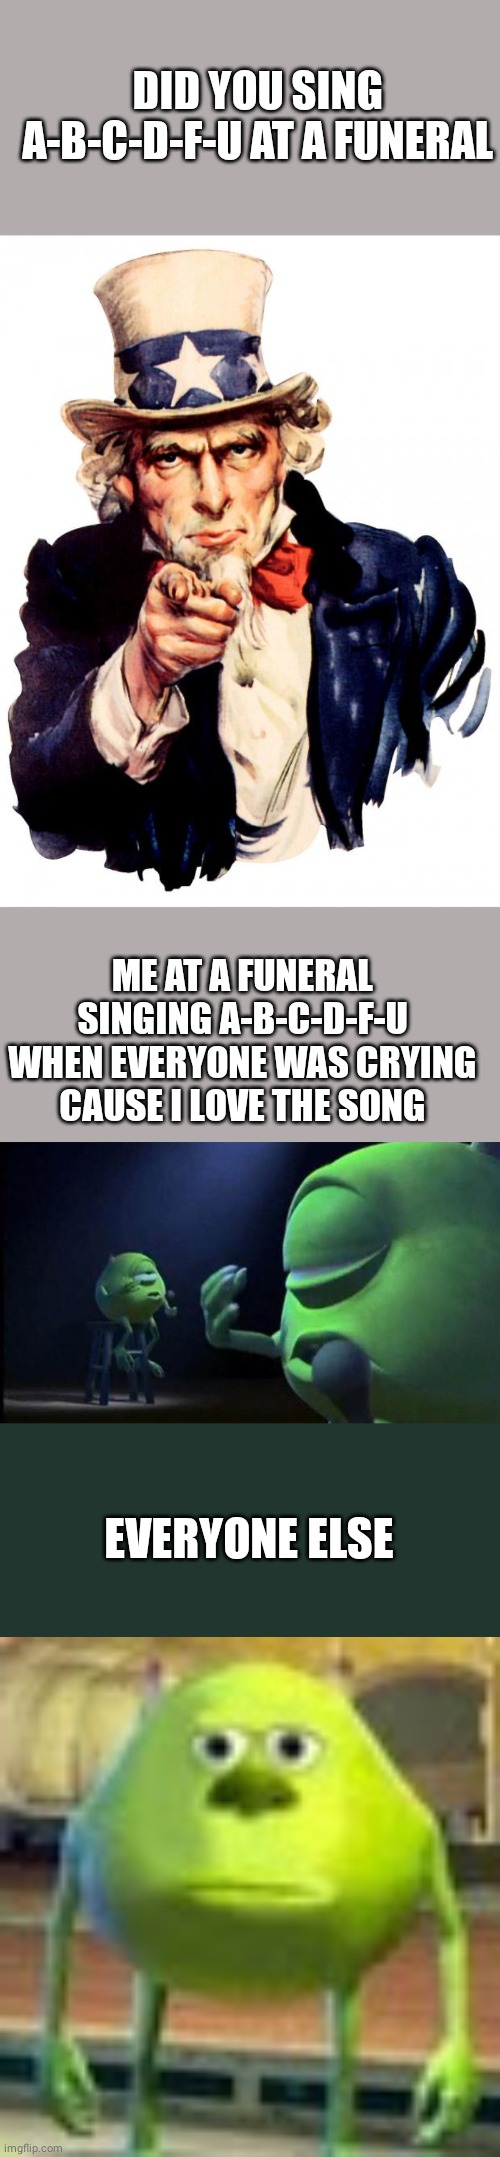 A-B-C-D-F-U at a funeral | DID YOU SING A-B-C-D-F-U AT A FUNERAL; ME AT A FUNERAL SINGING A-B-C-D-F-U WHEN EVERYONE WAS CRYING CAUSE I LOVE THE SONG; EVERYONE ELSE | image tagged in memes,uncle sam,mike wazowski singing,sully wazowski | made w/ Imgflip meme maker